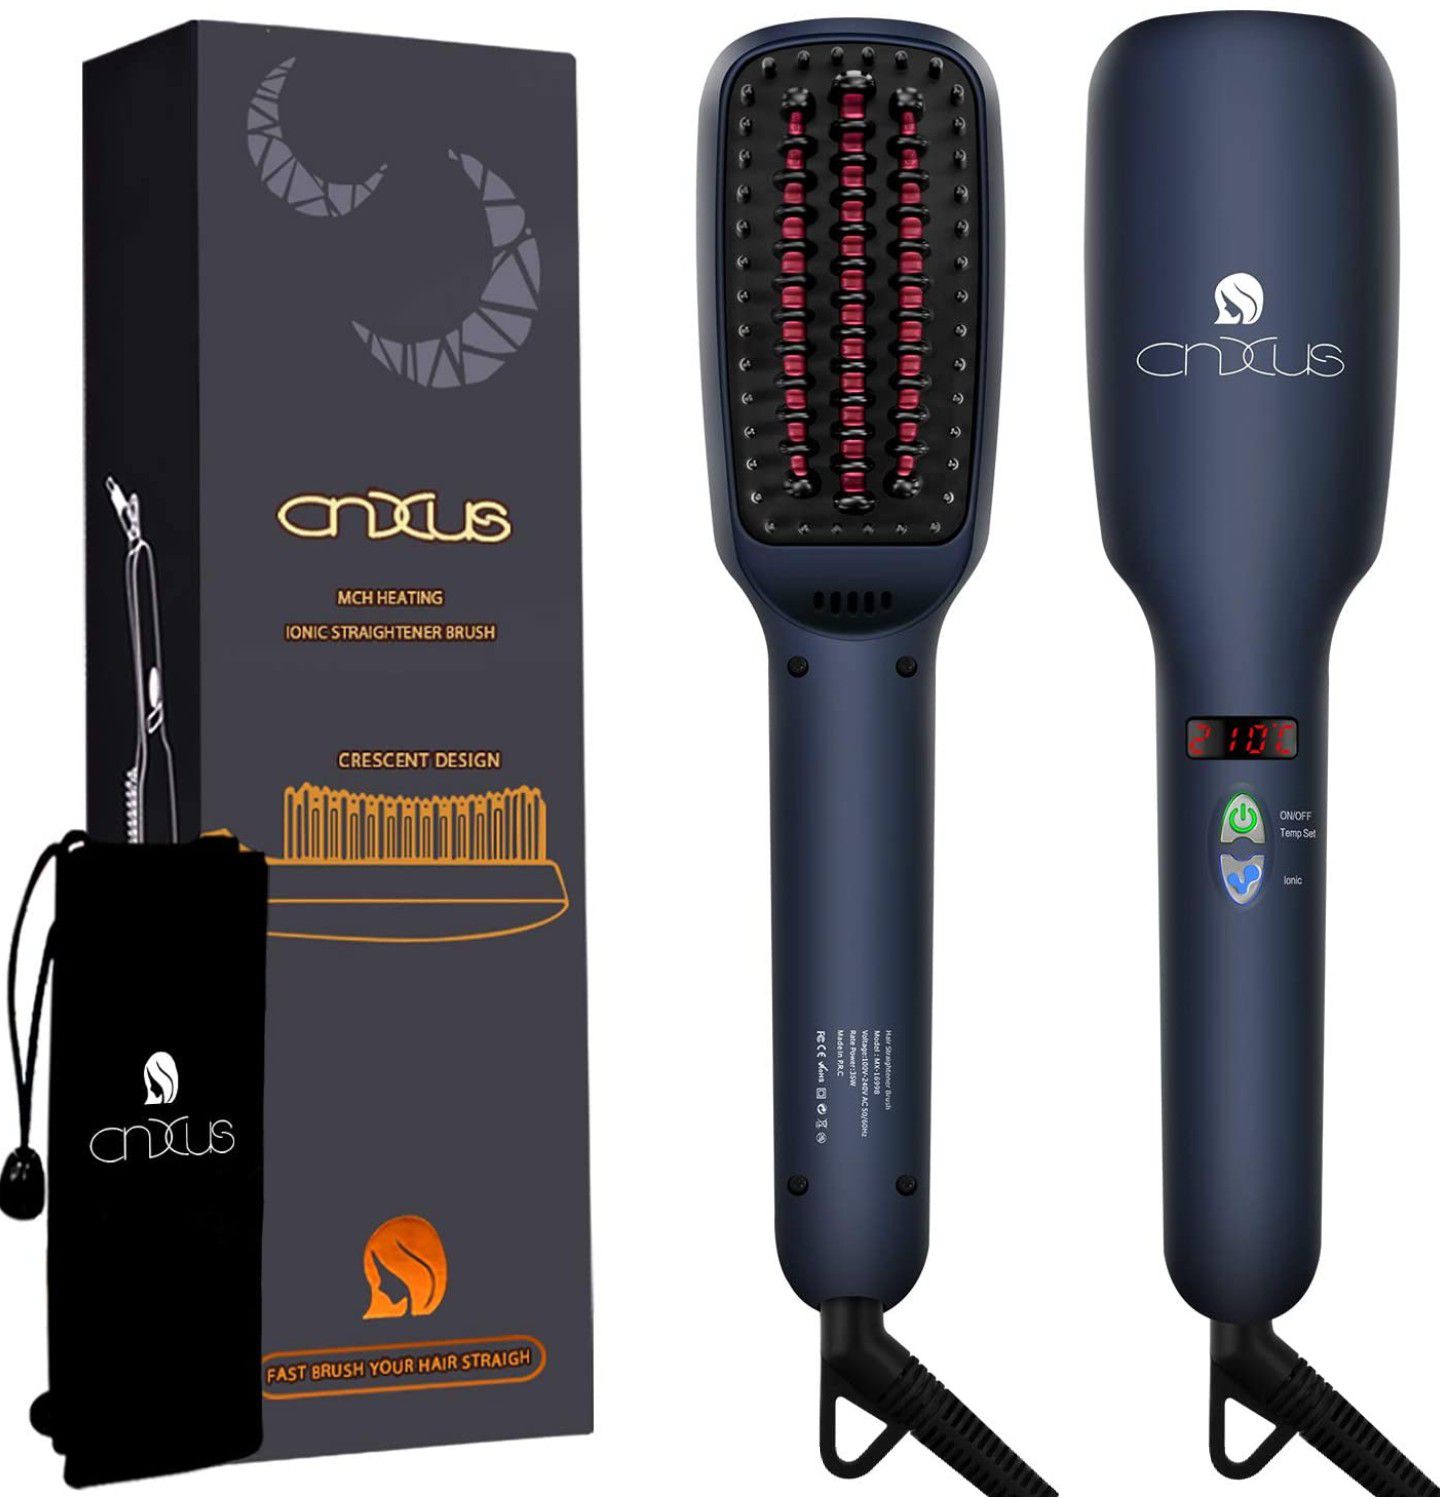 Hair Straightening Brush, MCH Ceramic, Ionic, Frizz Free Hair Care for Silky Straight Hair, LCD Display, Adjustable Temperature